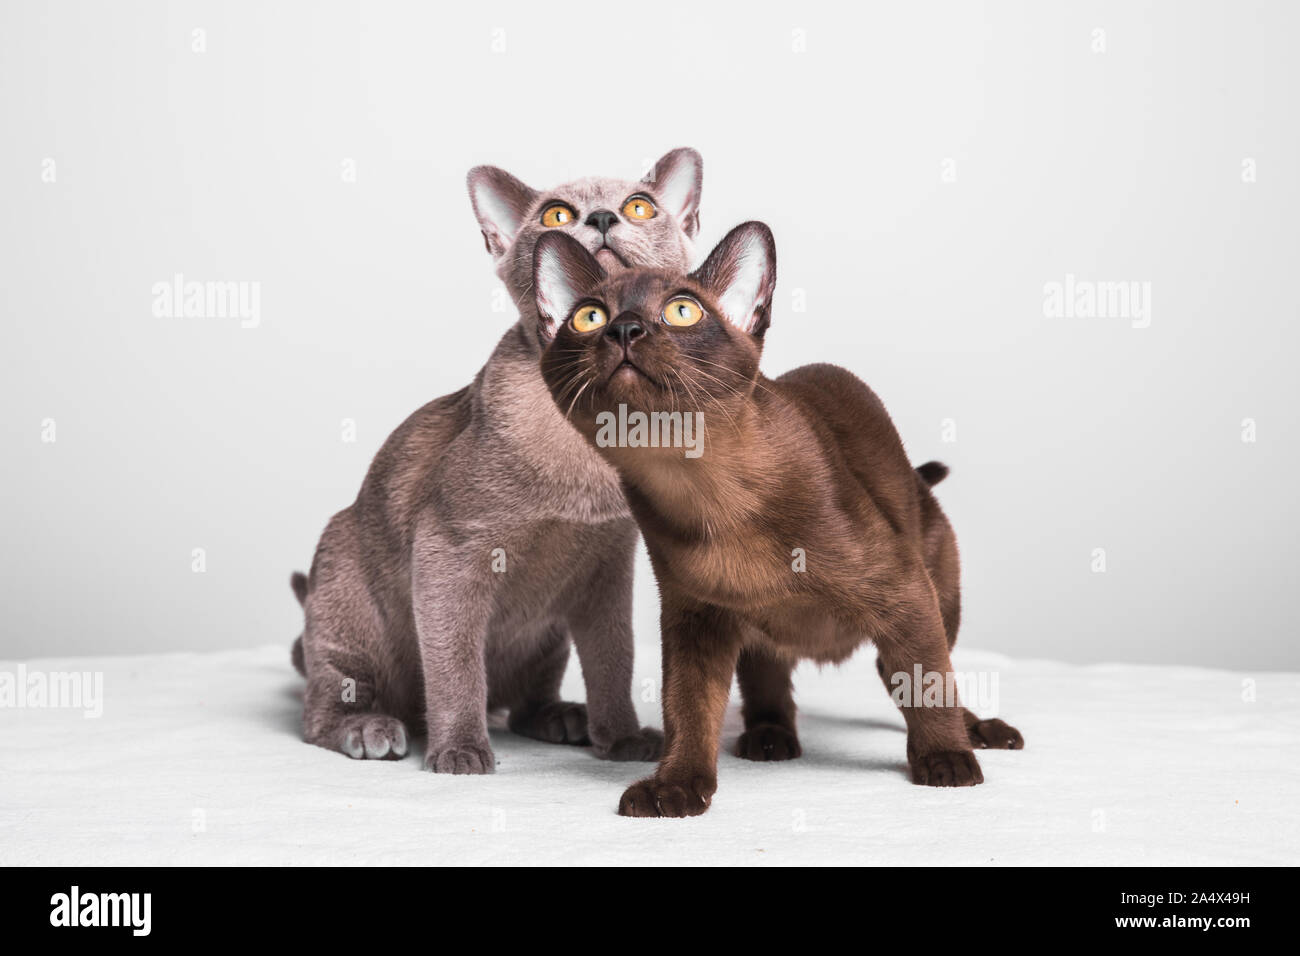 Two burmese kittens looking up. The cats are about 17 weeks old and they are sitting on a white blanket with a gray background. Stock Photo